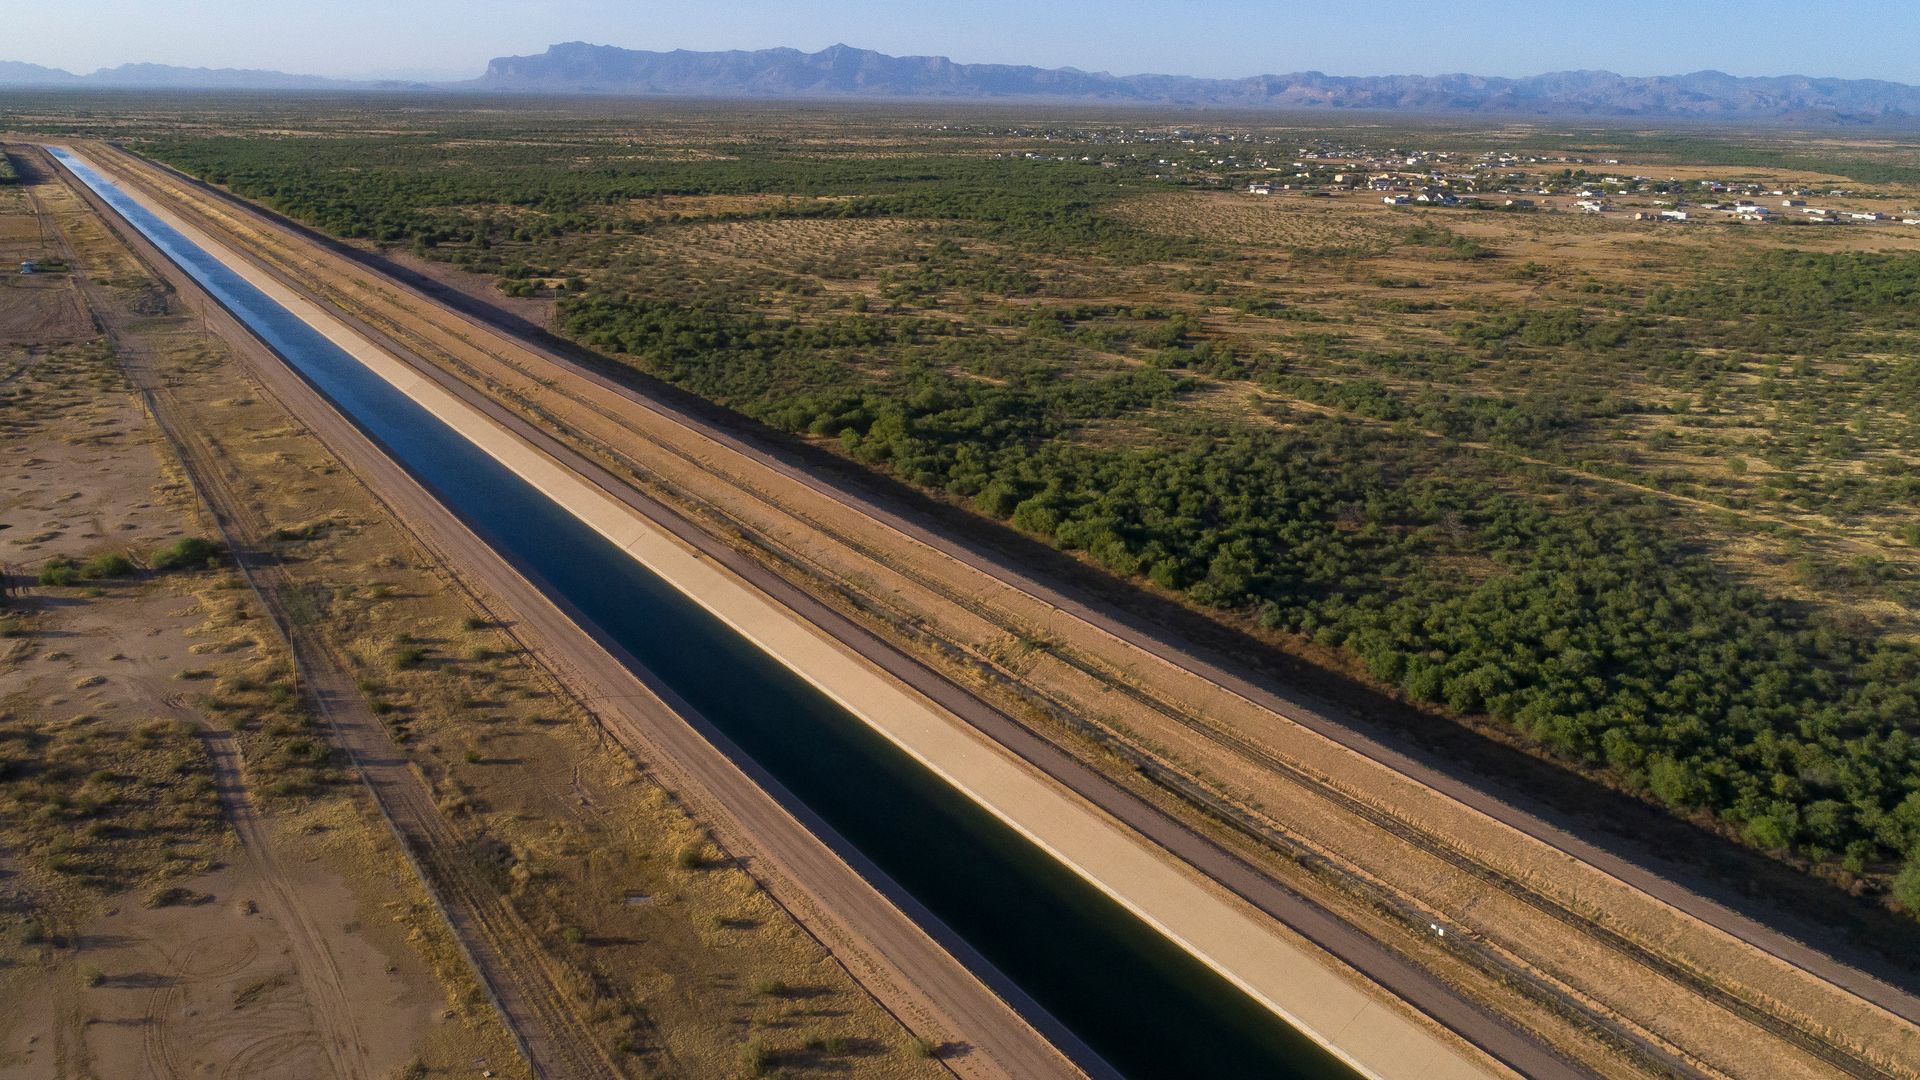 A section of the Central Arizona Project, which diverts water from the Colorado River to to central and southern Arizona, outside of Santan, Arizona, on May 9.